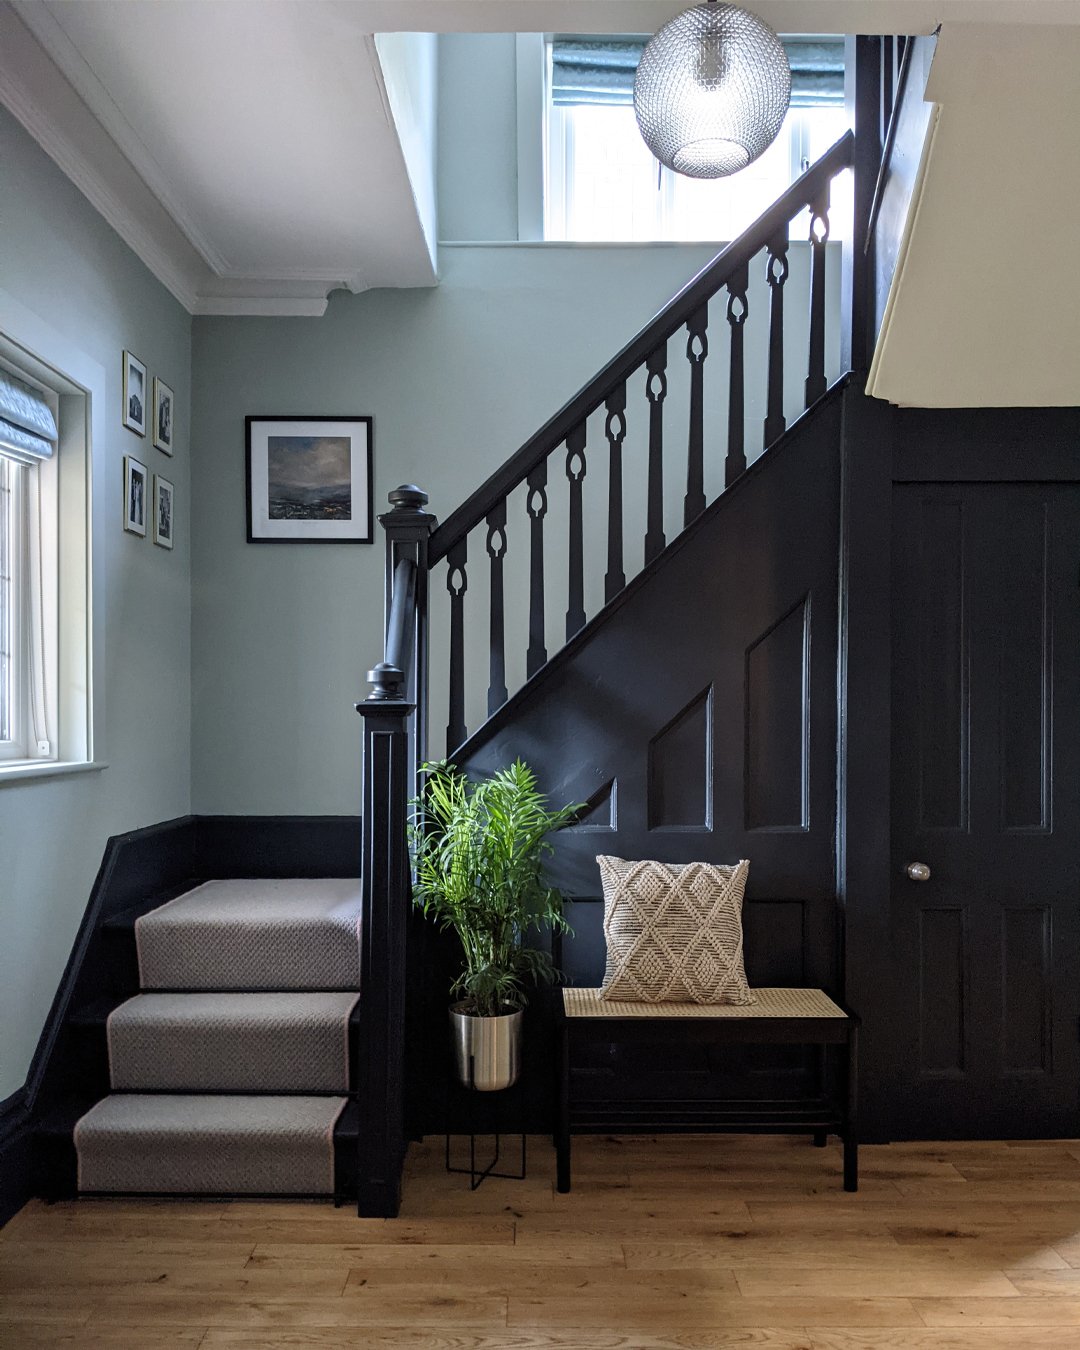 The Edwardian semi project - one of my favourite hallway designs 💚 There are so many lovely original features here but previously they felt lost so we highlighted them by painting the woodwork in a dark colour - it made such a massive difference to 